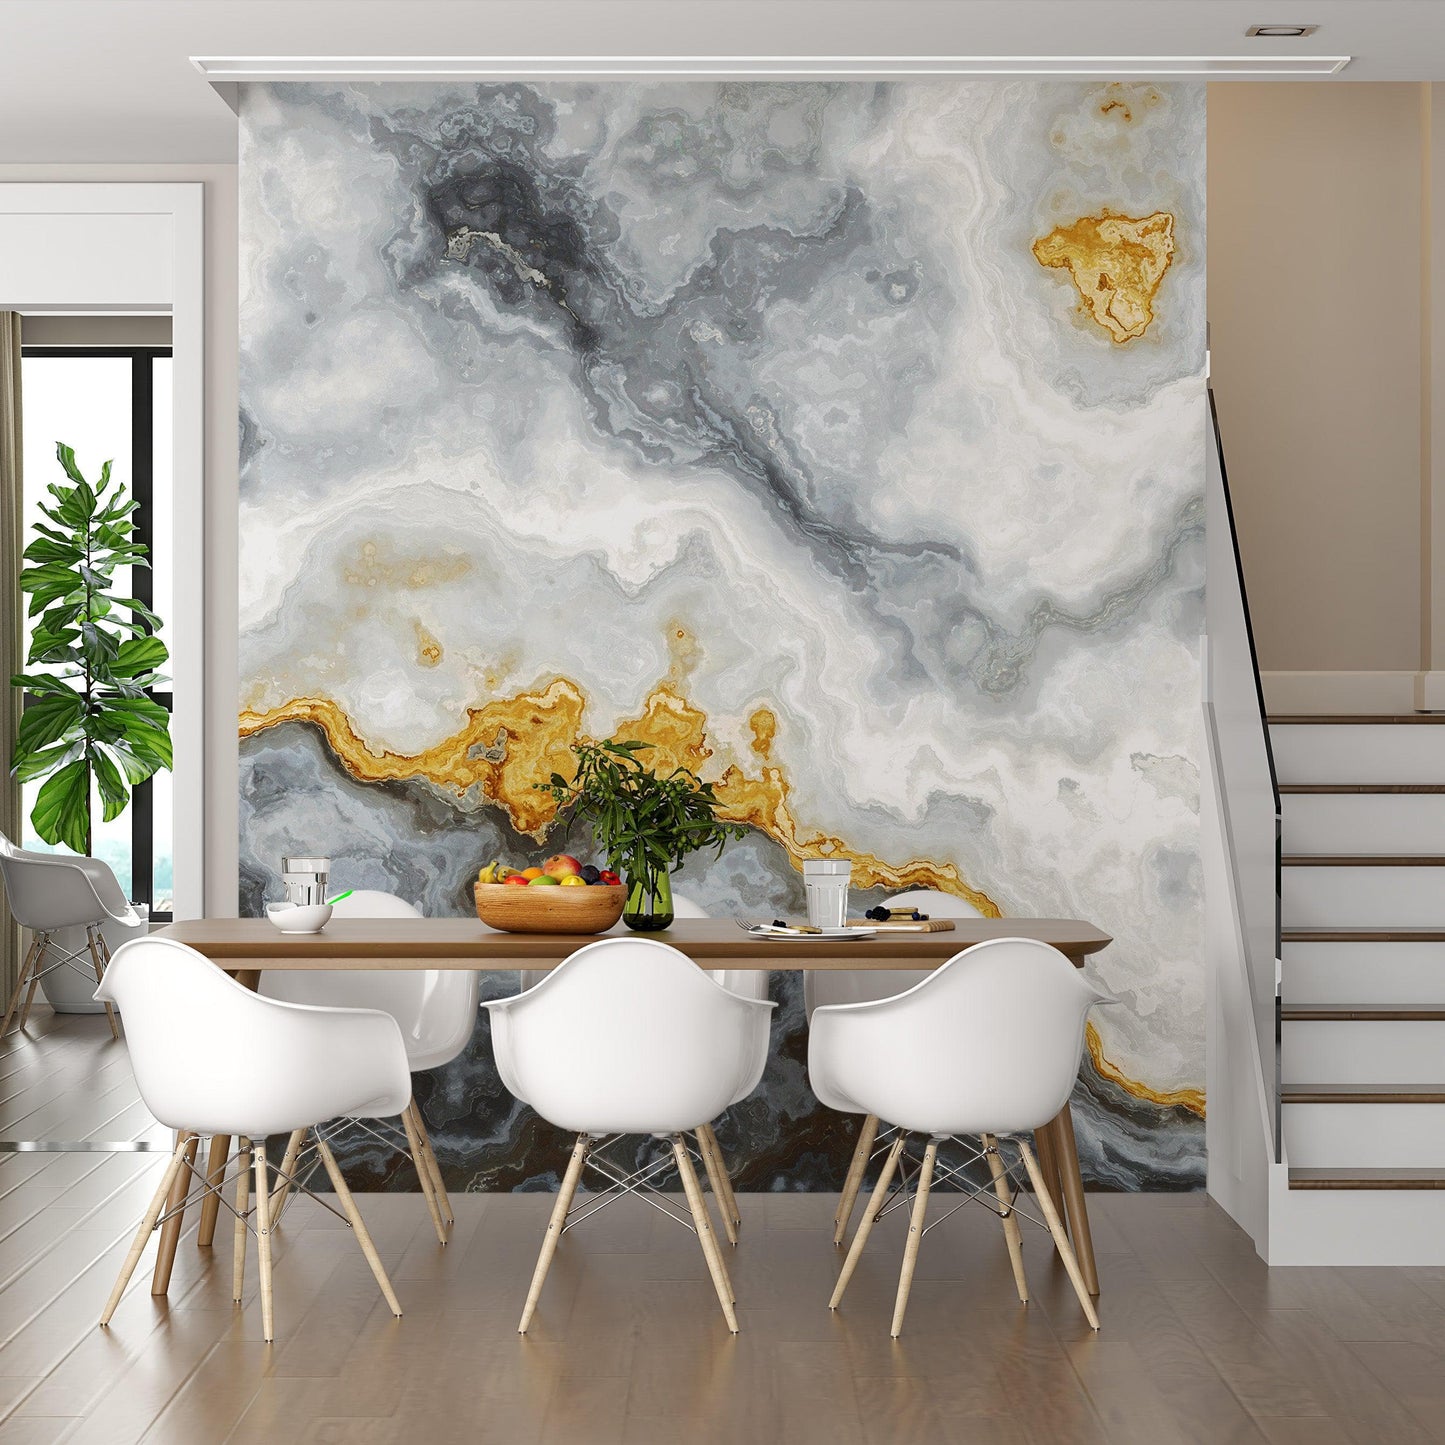 Gray and Gold Marble Stone Quartz Mural Wall Sticker #6190